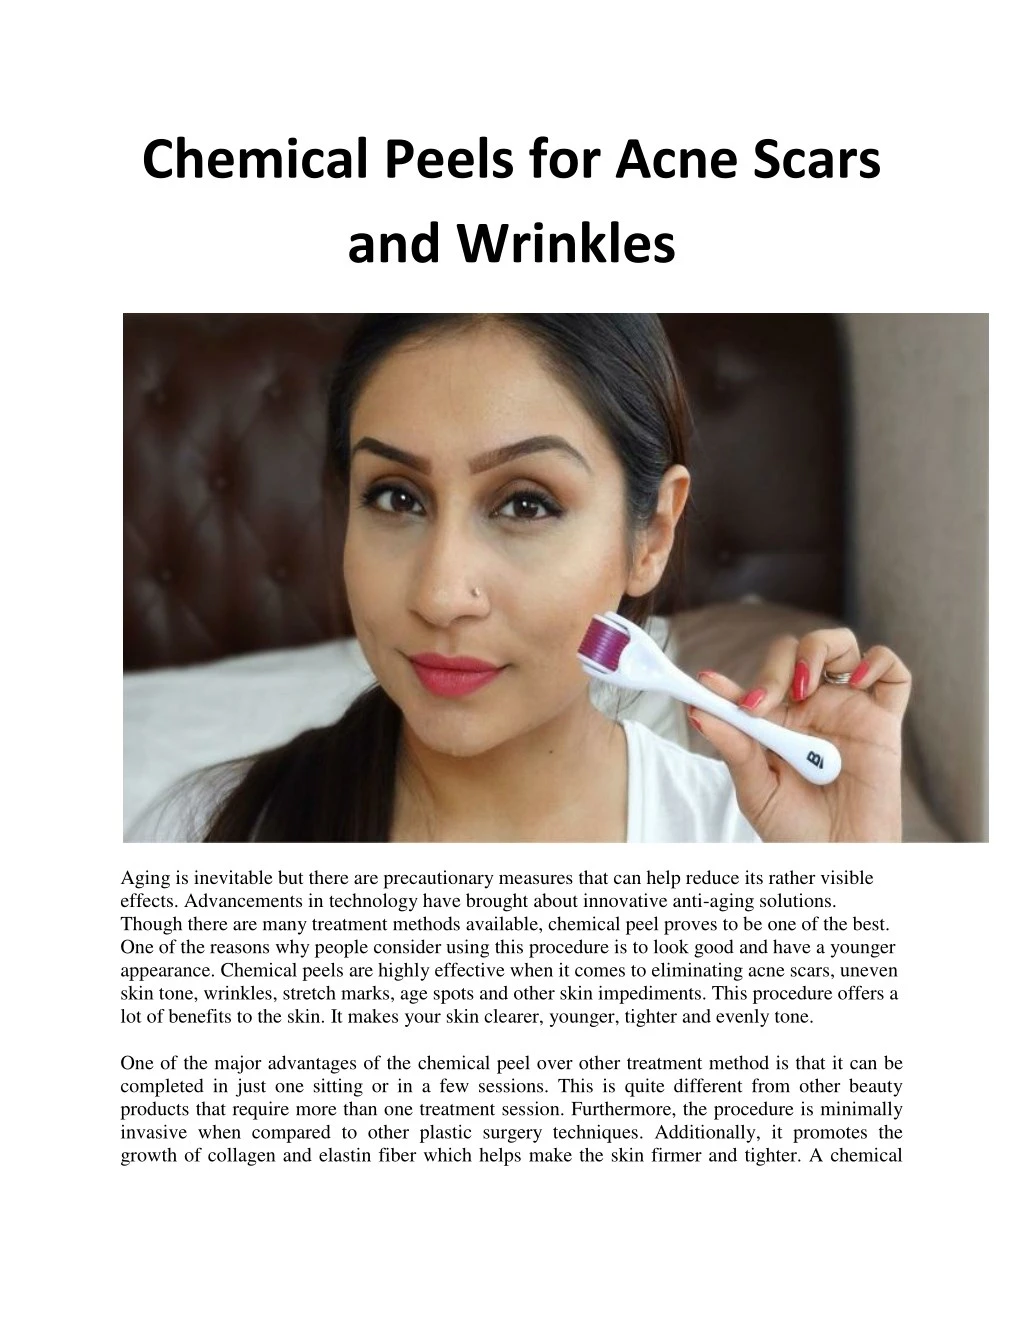 chemical peels for acne scars and wrinkles